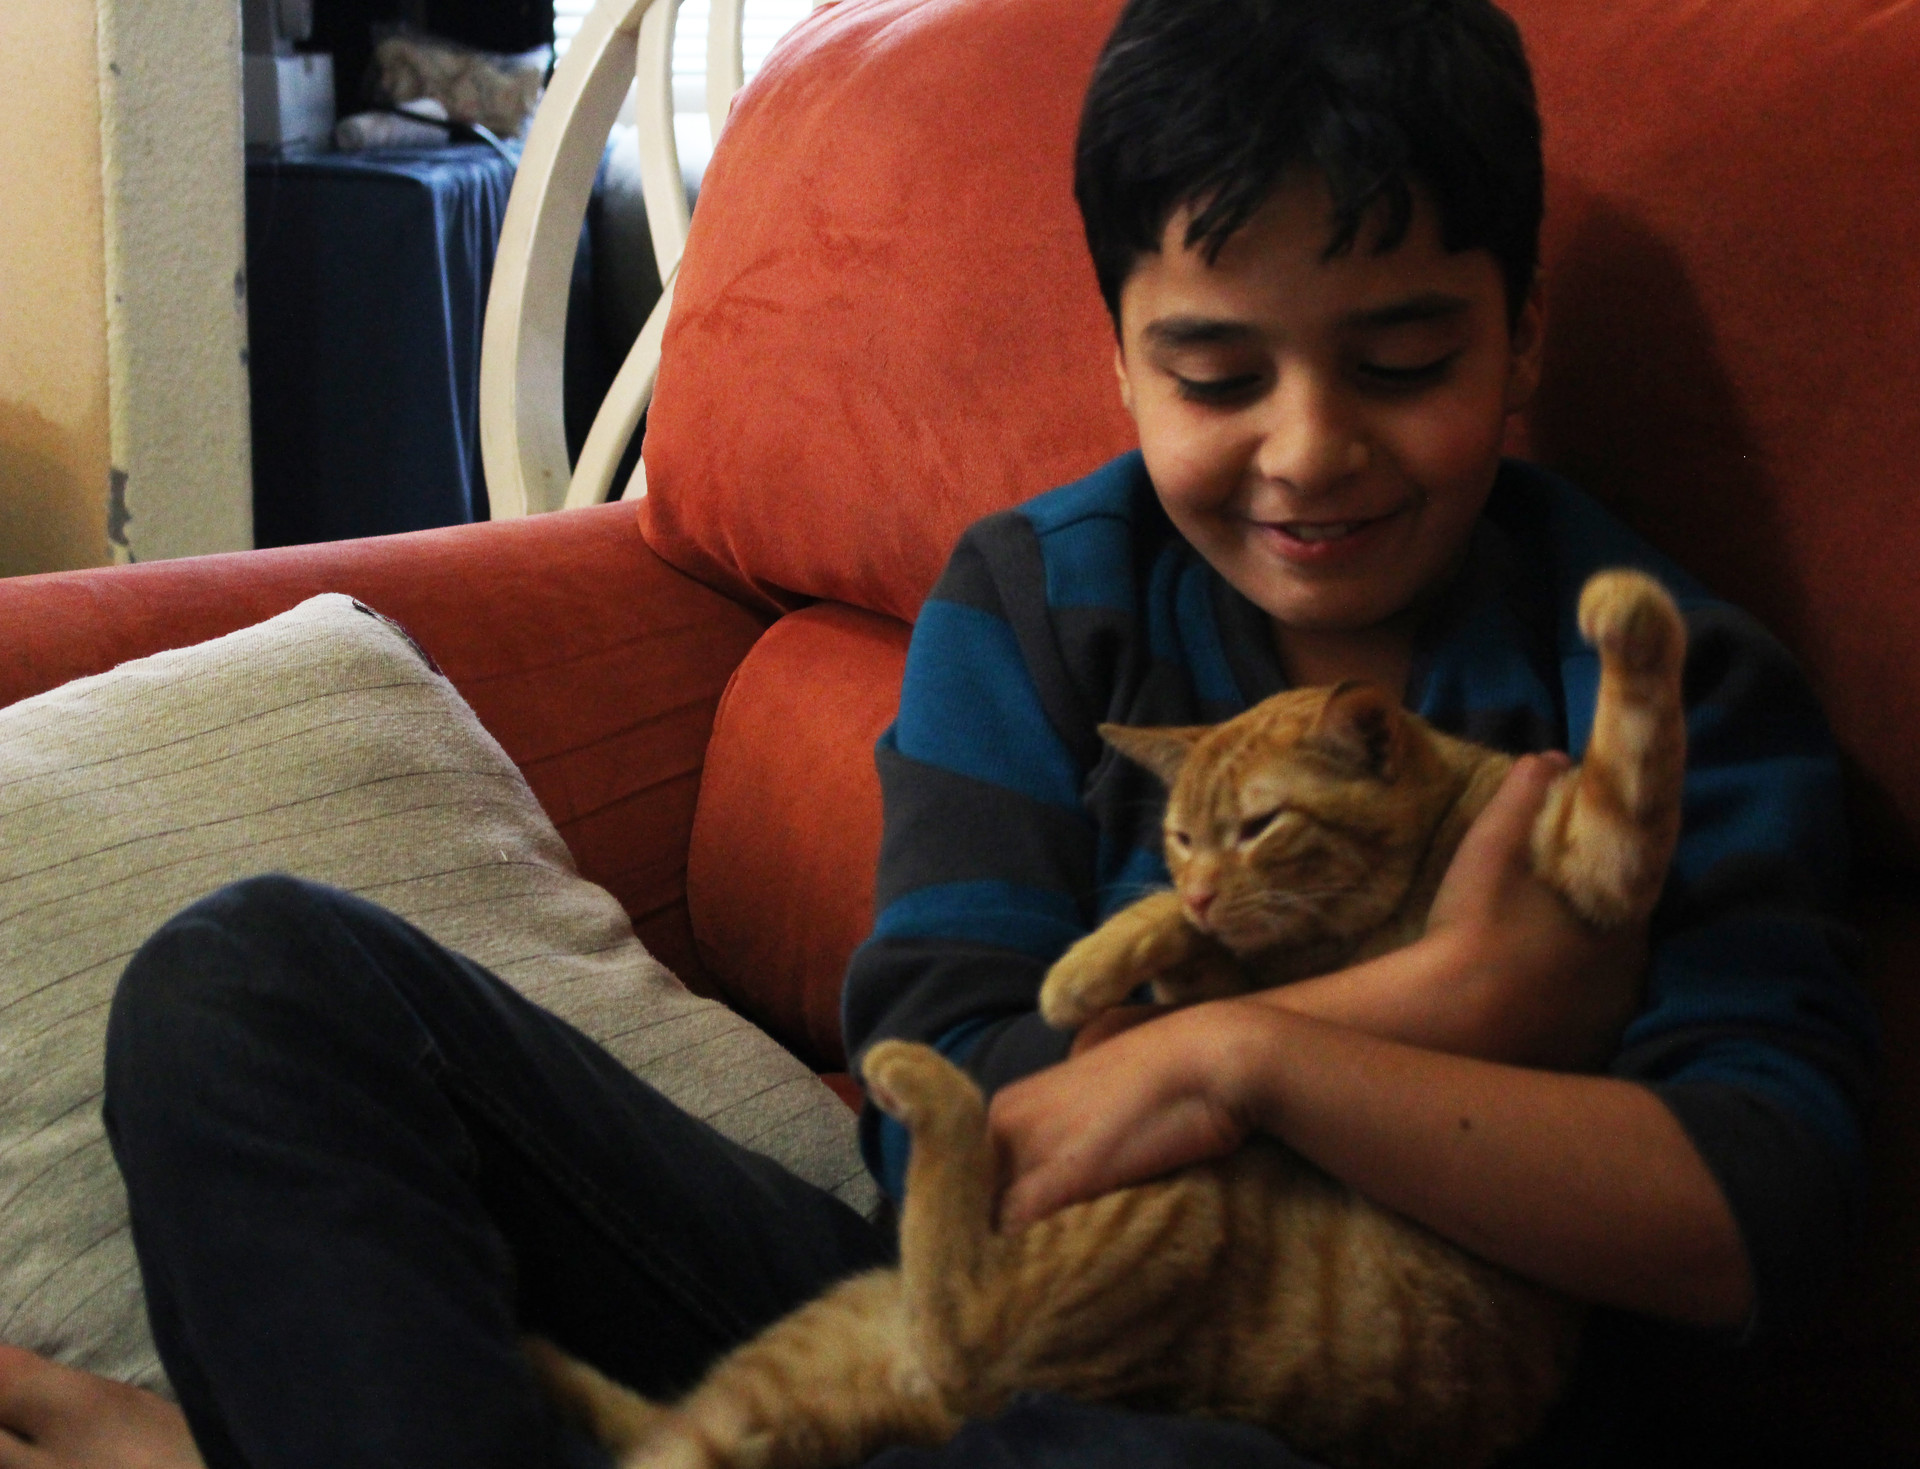 Mohammed Rawoas, 10, plays in his family's Oakland apartment with a cat he adopted and called Simbad.